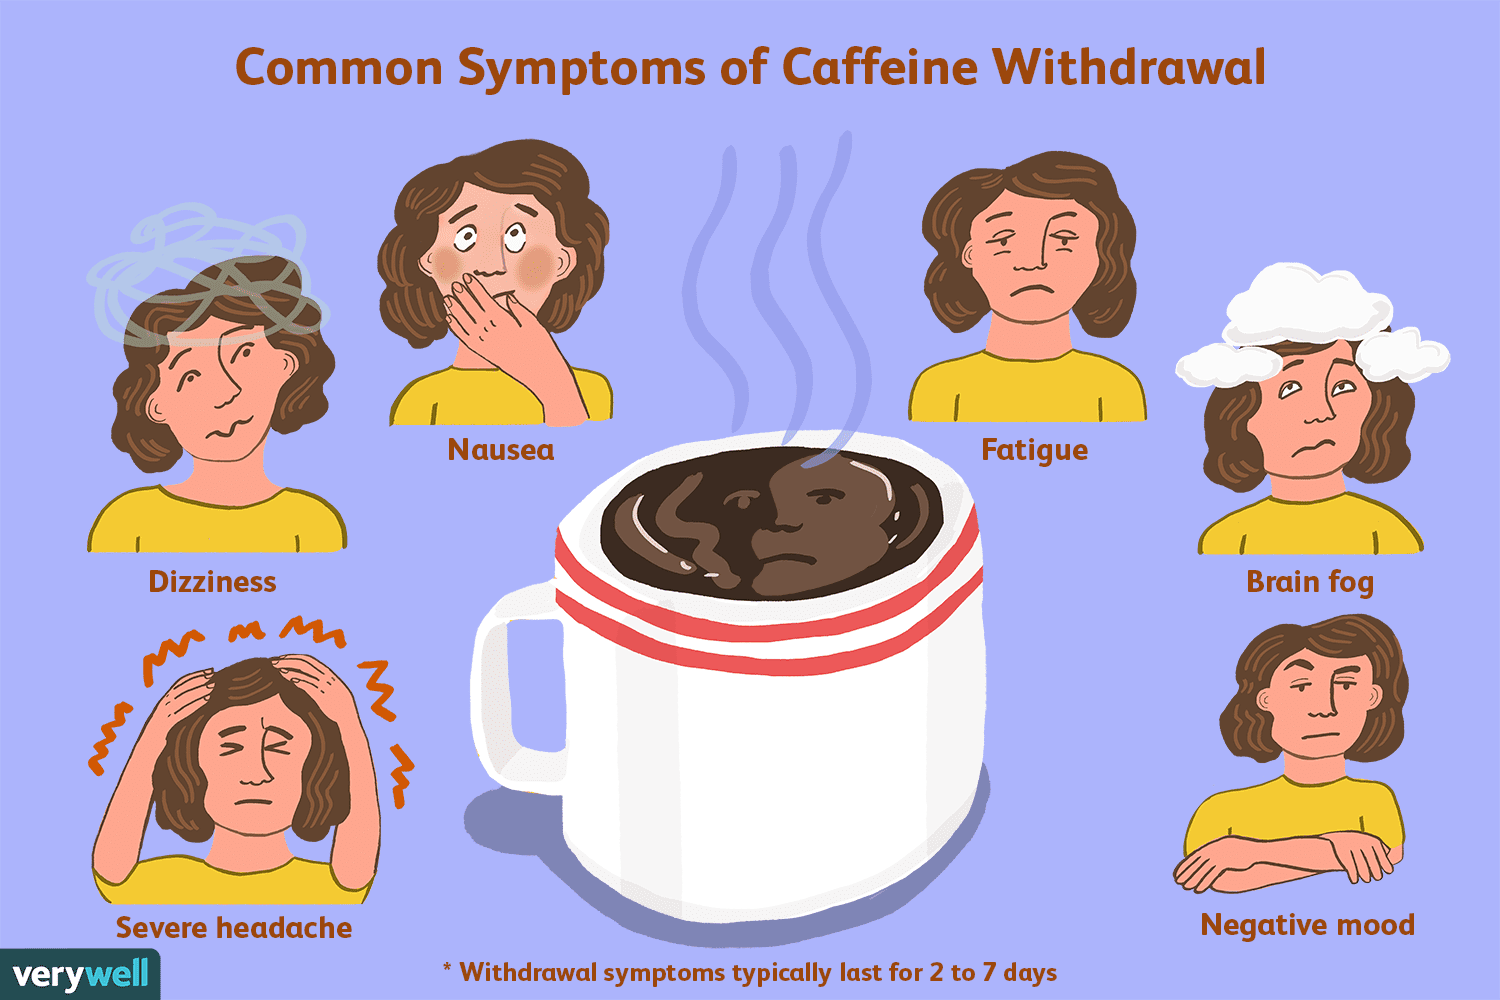 Can Caffeine Withdrawal Cause Vomiting?